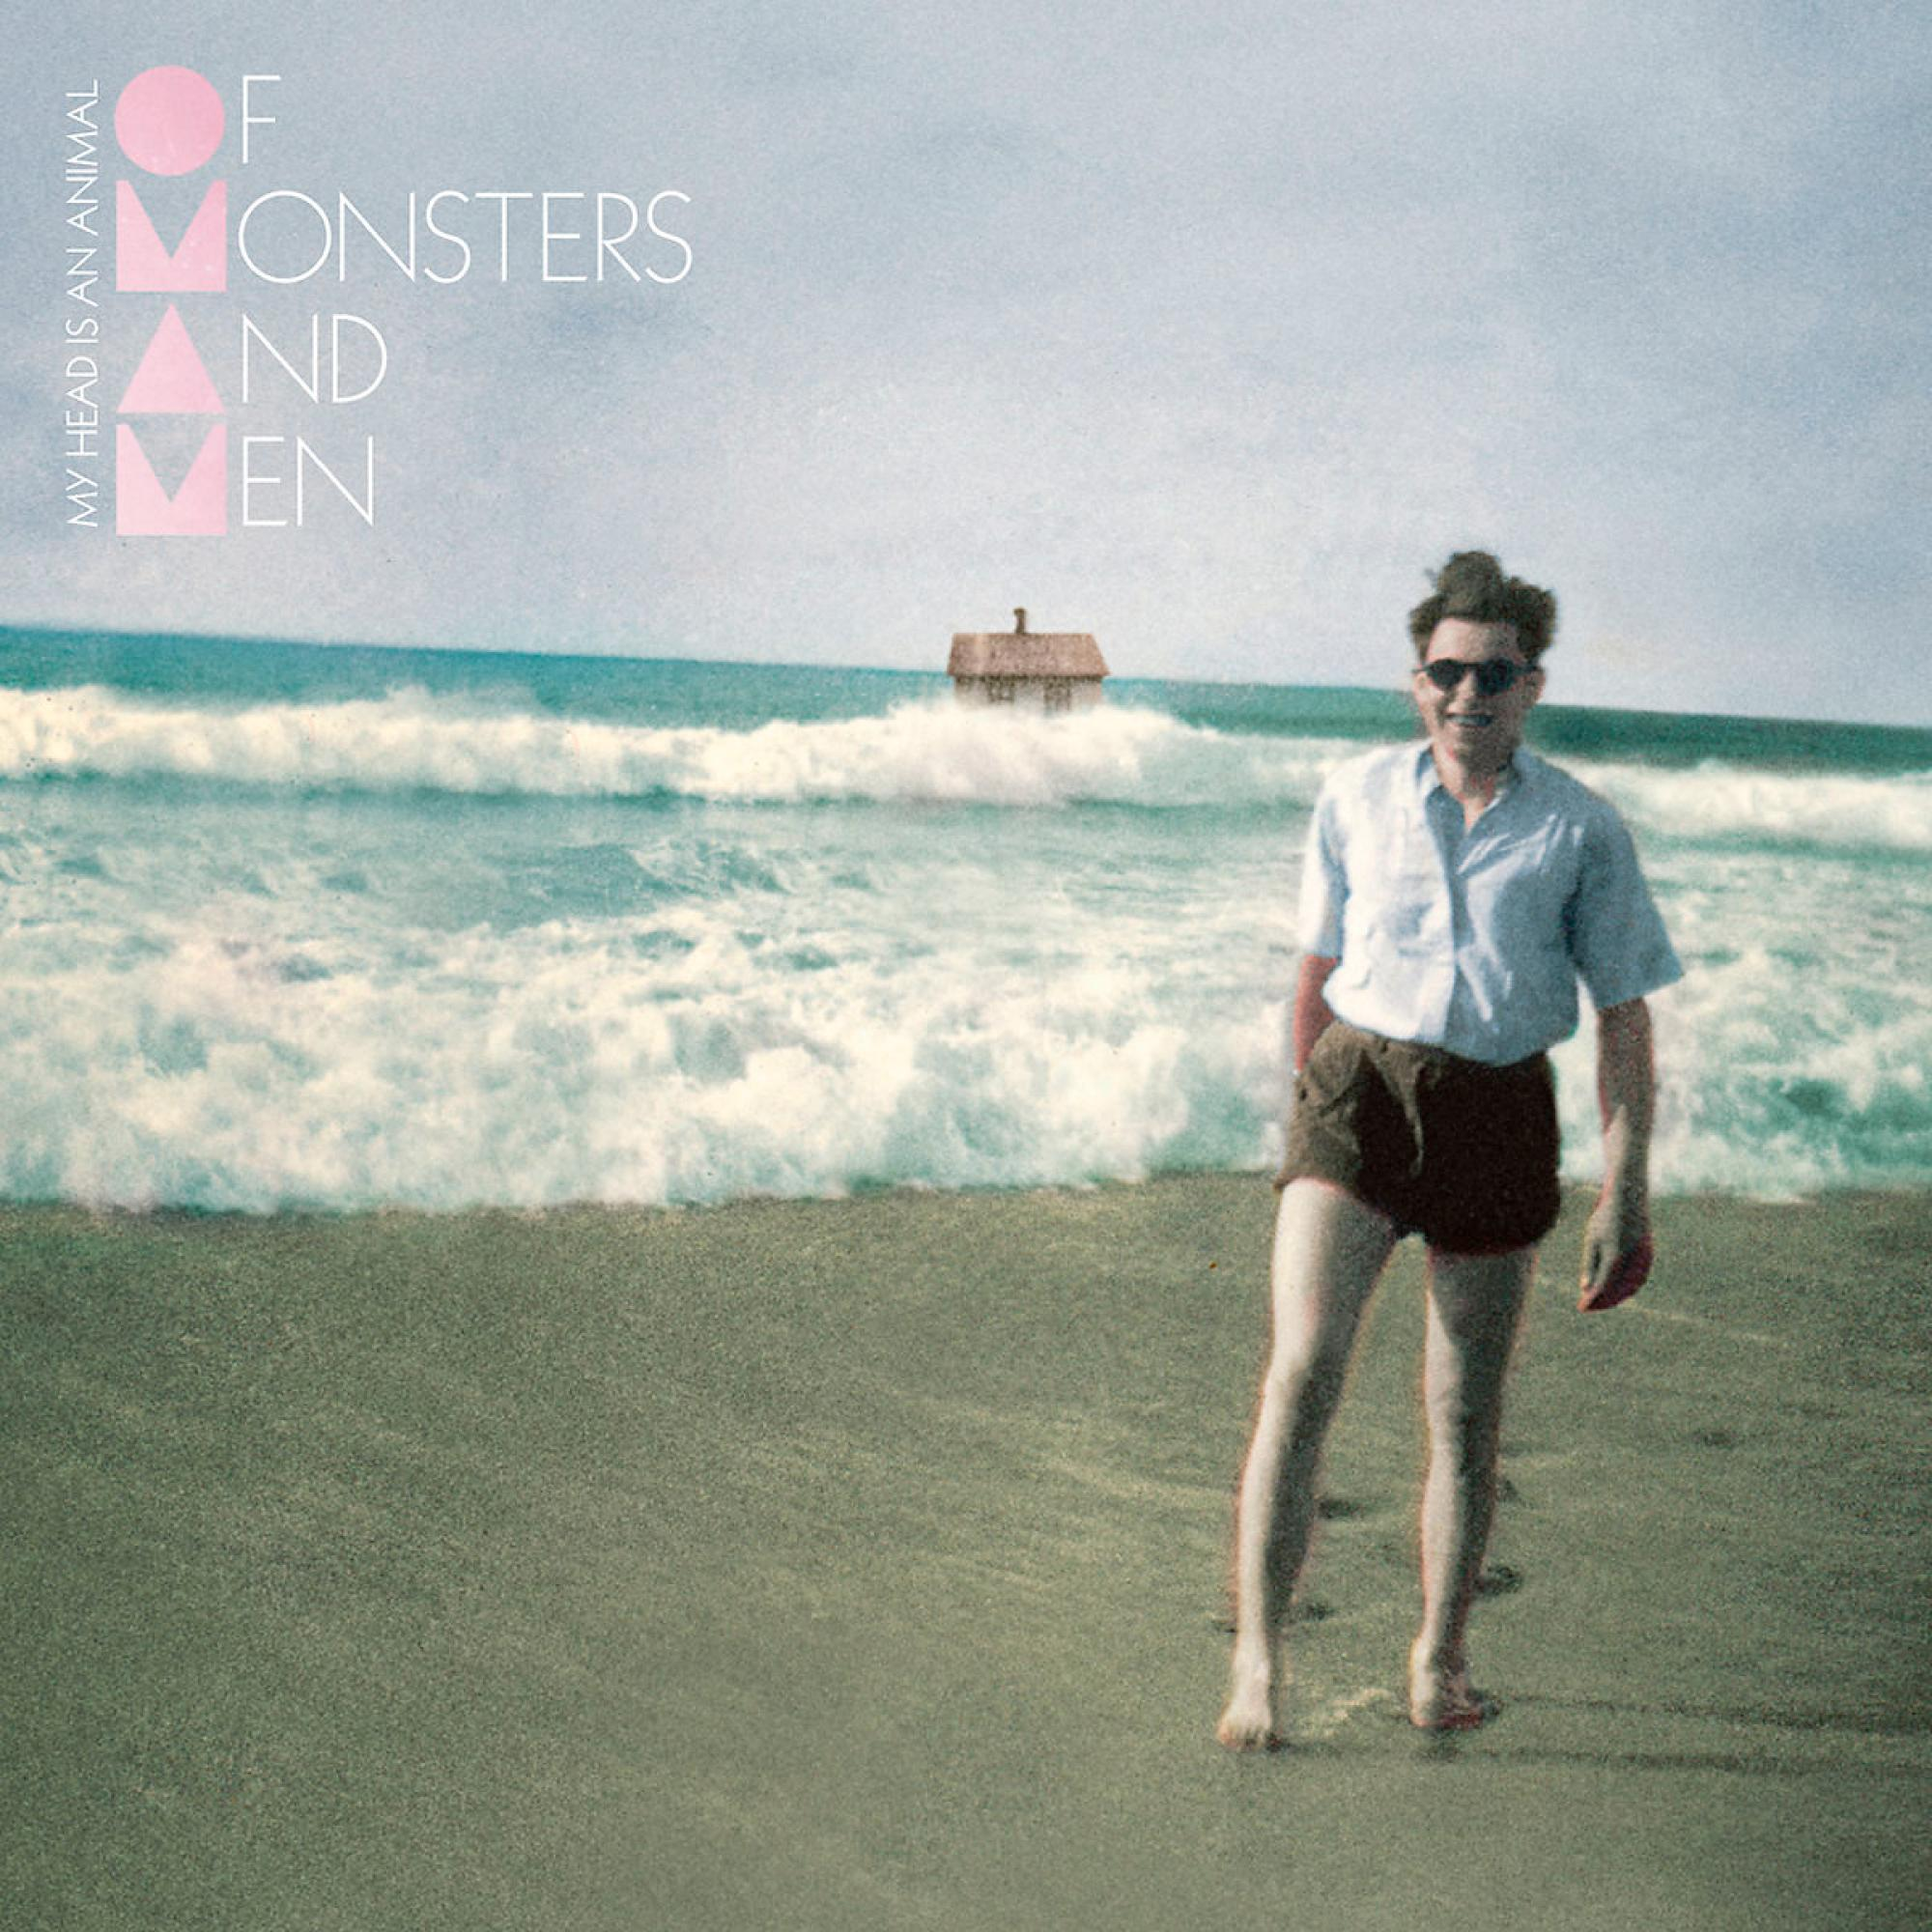 Head My Monsters Of - Men - (Vinyl) An Is Animal And